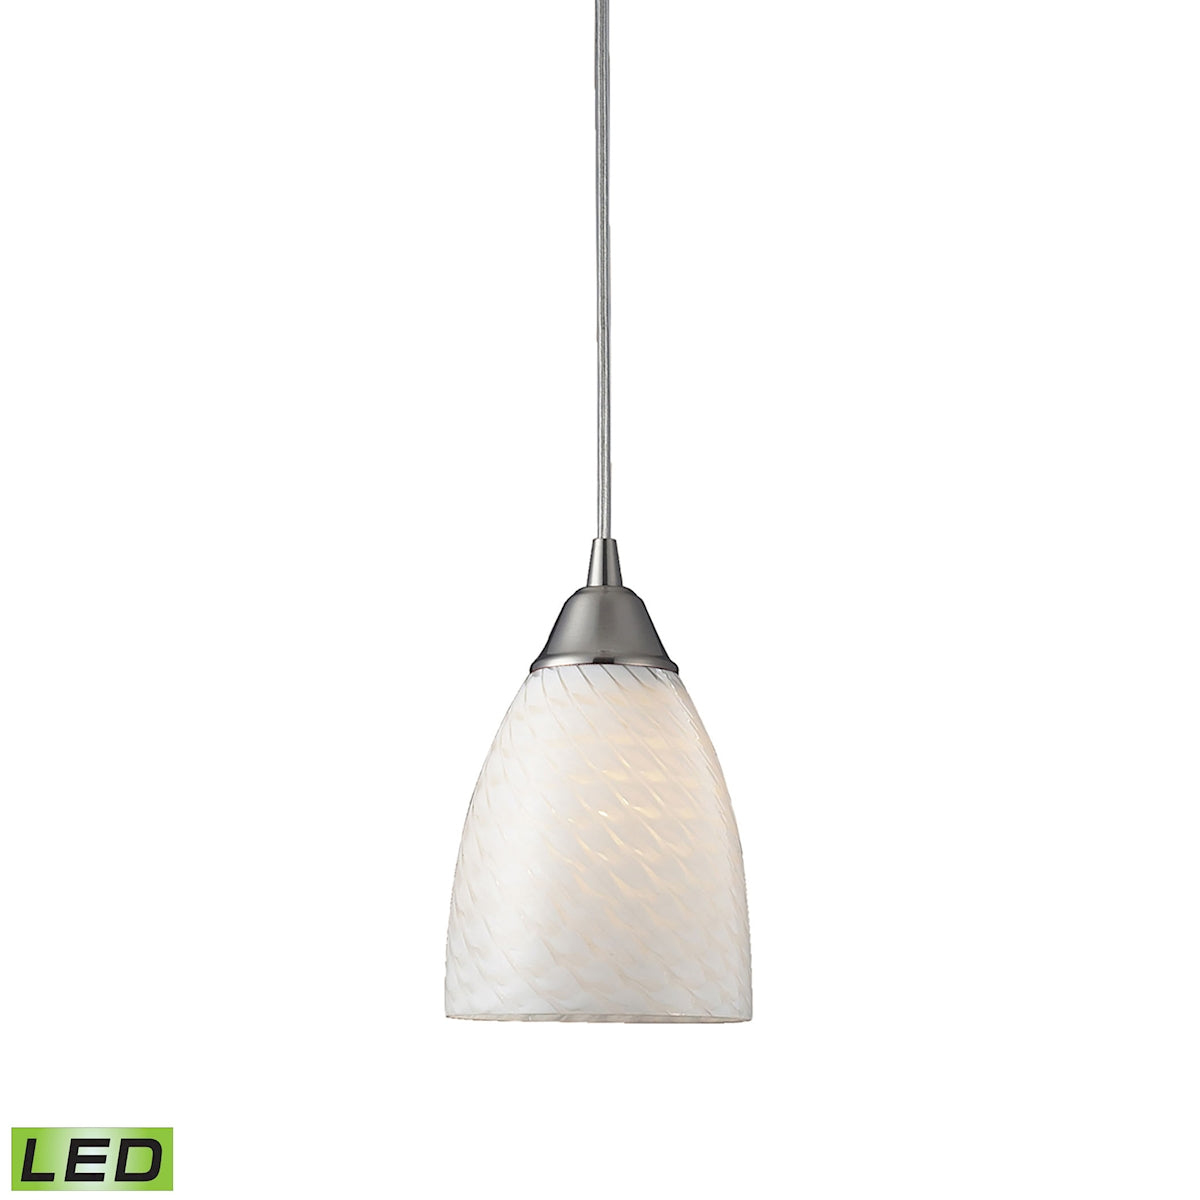 Arco Baleno 1-Light Mini Pendant in Satin Nickel with White Swirl Glass - Includes LED Bulb